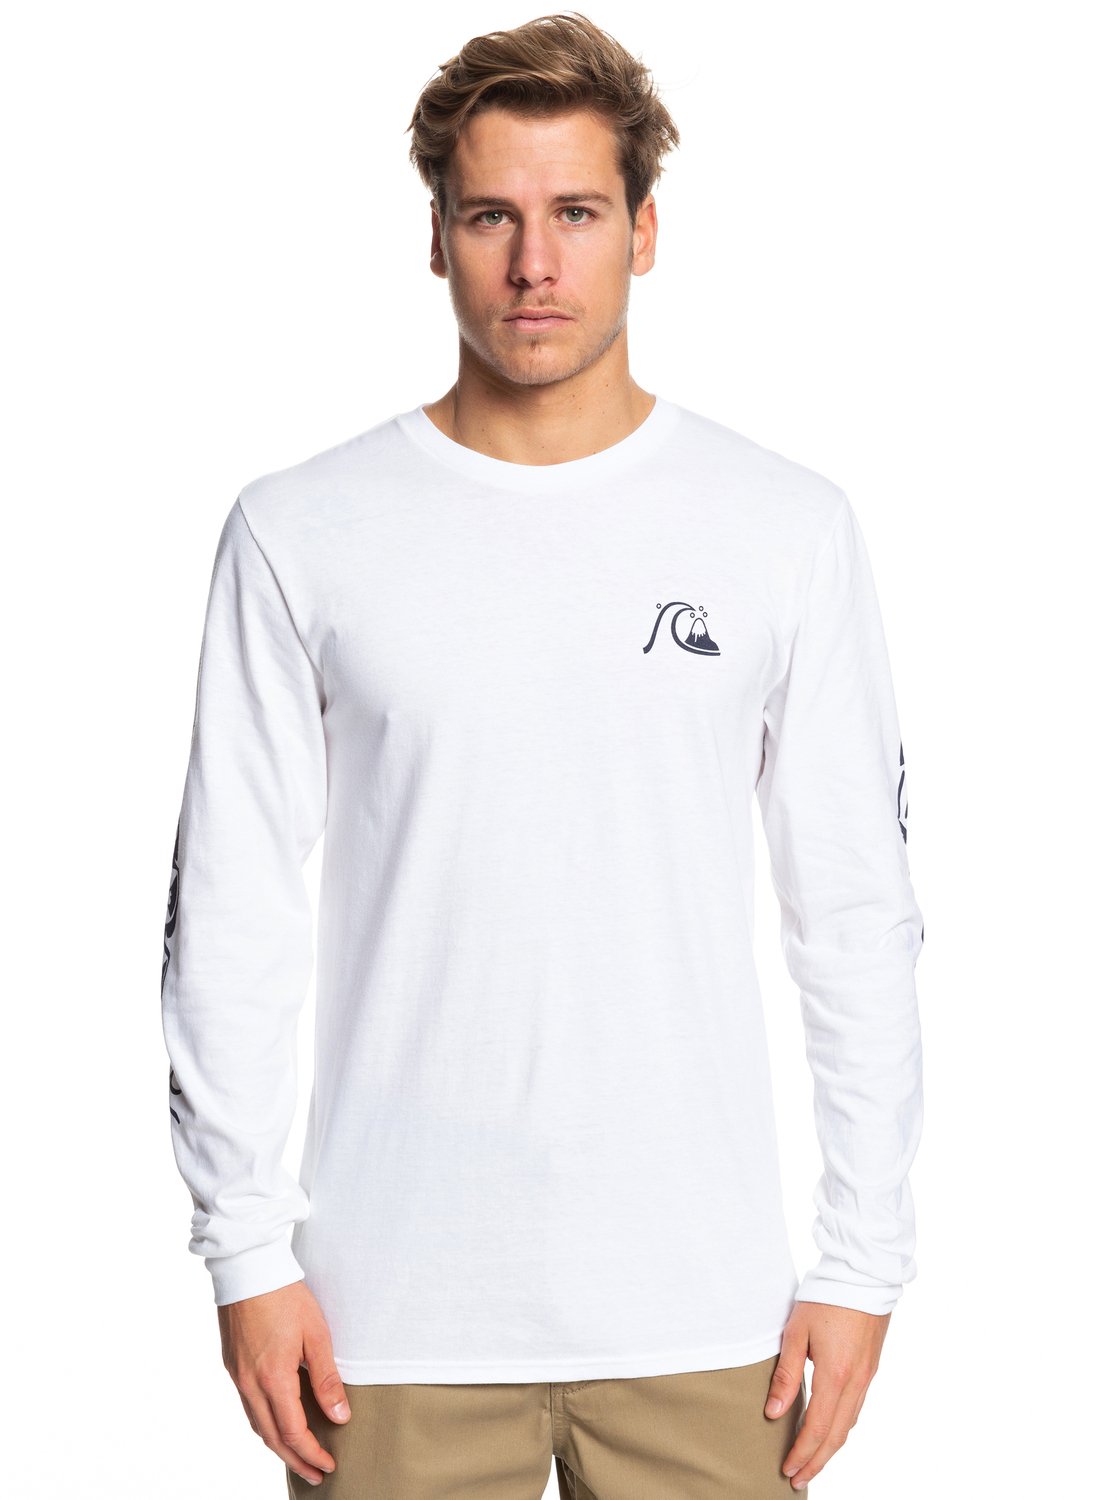 Quiksilver Too Many Rules Tee WBB0 L